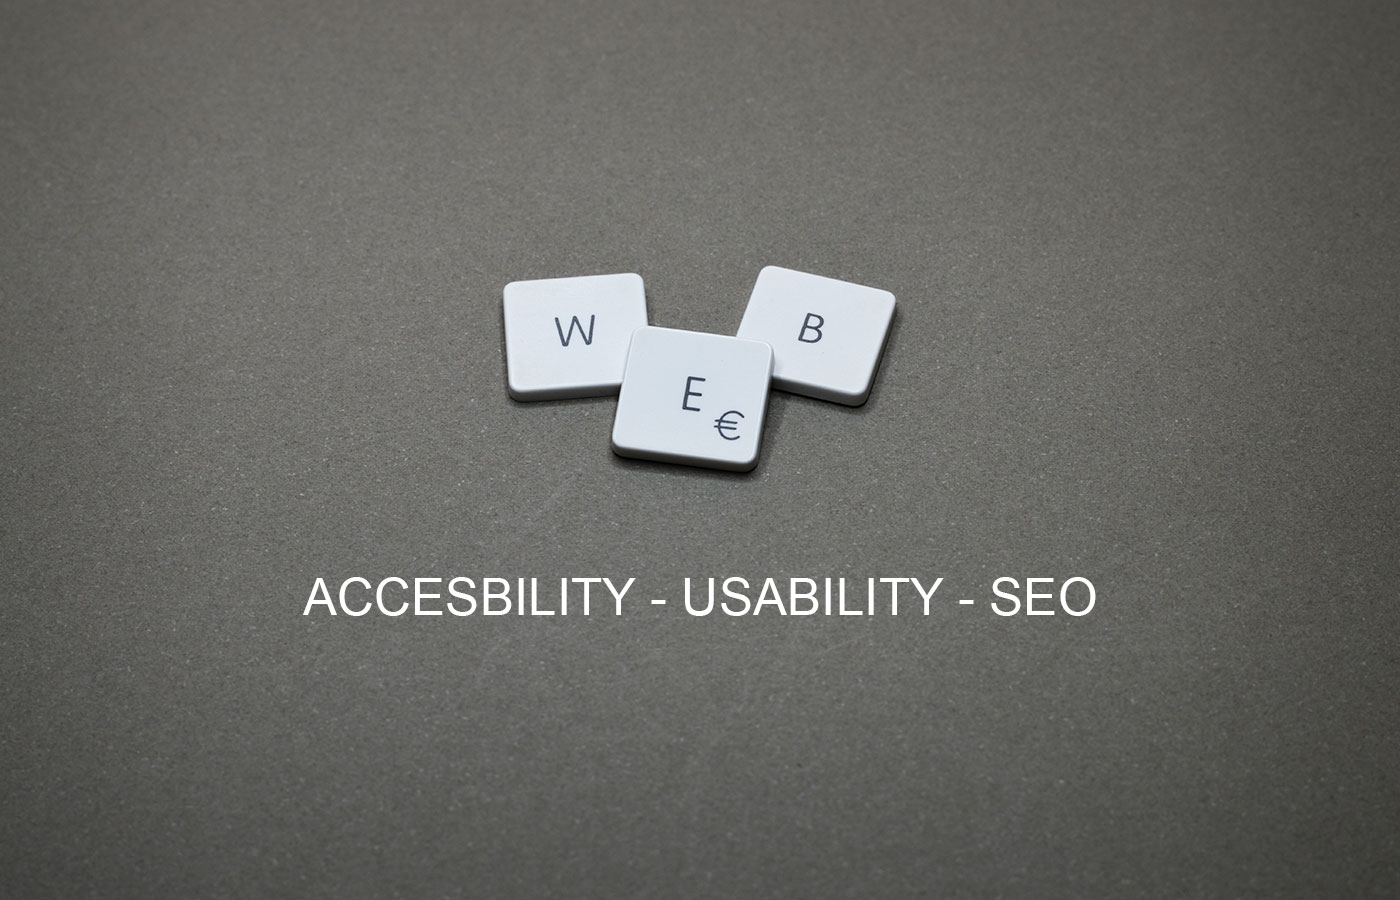 SEO benefits of an accessible website